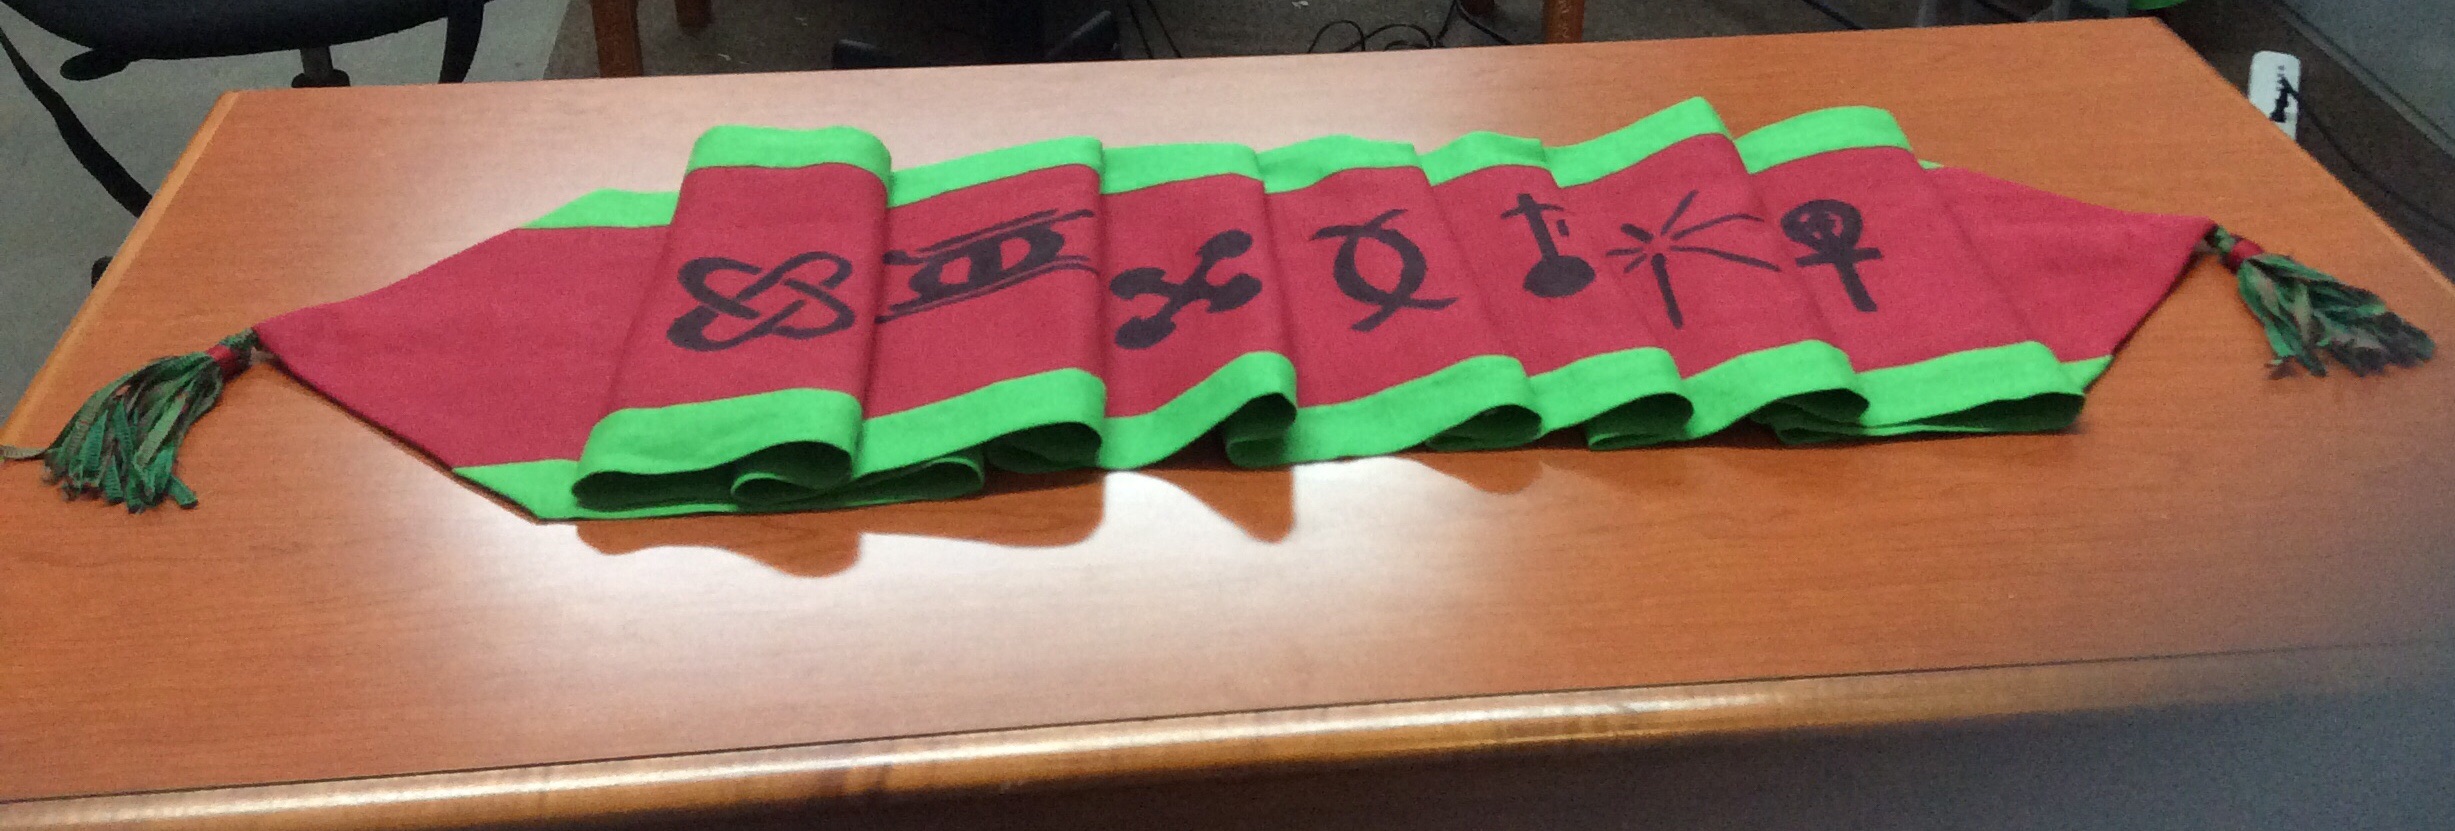 Jacqueline, KWANZAA table runner with the Nguzo Saba - The  symbols for the Seven Principles.

Fresh green
Crims...